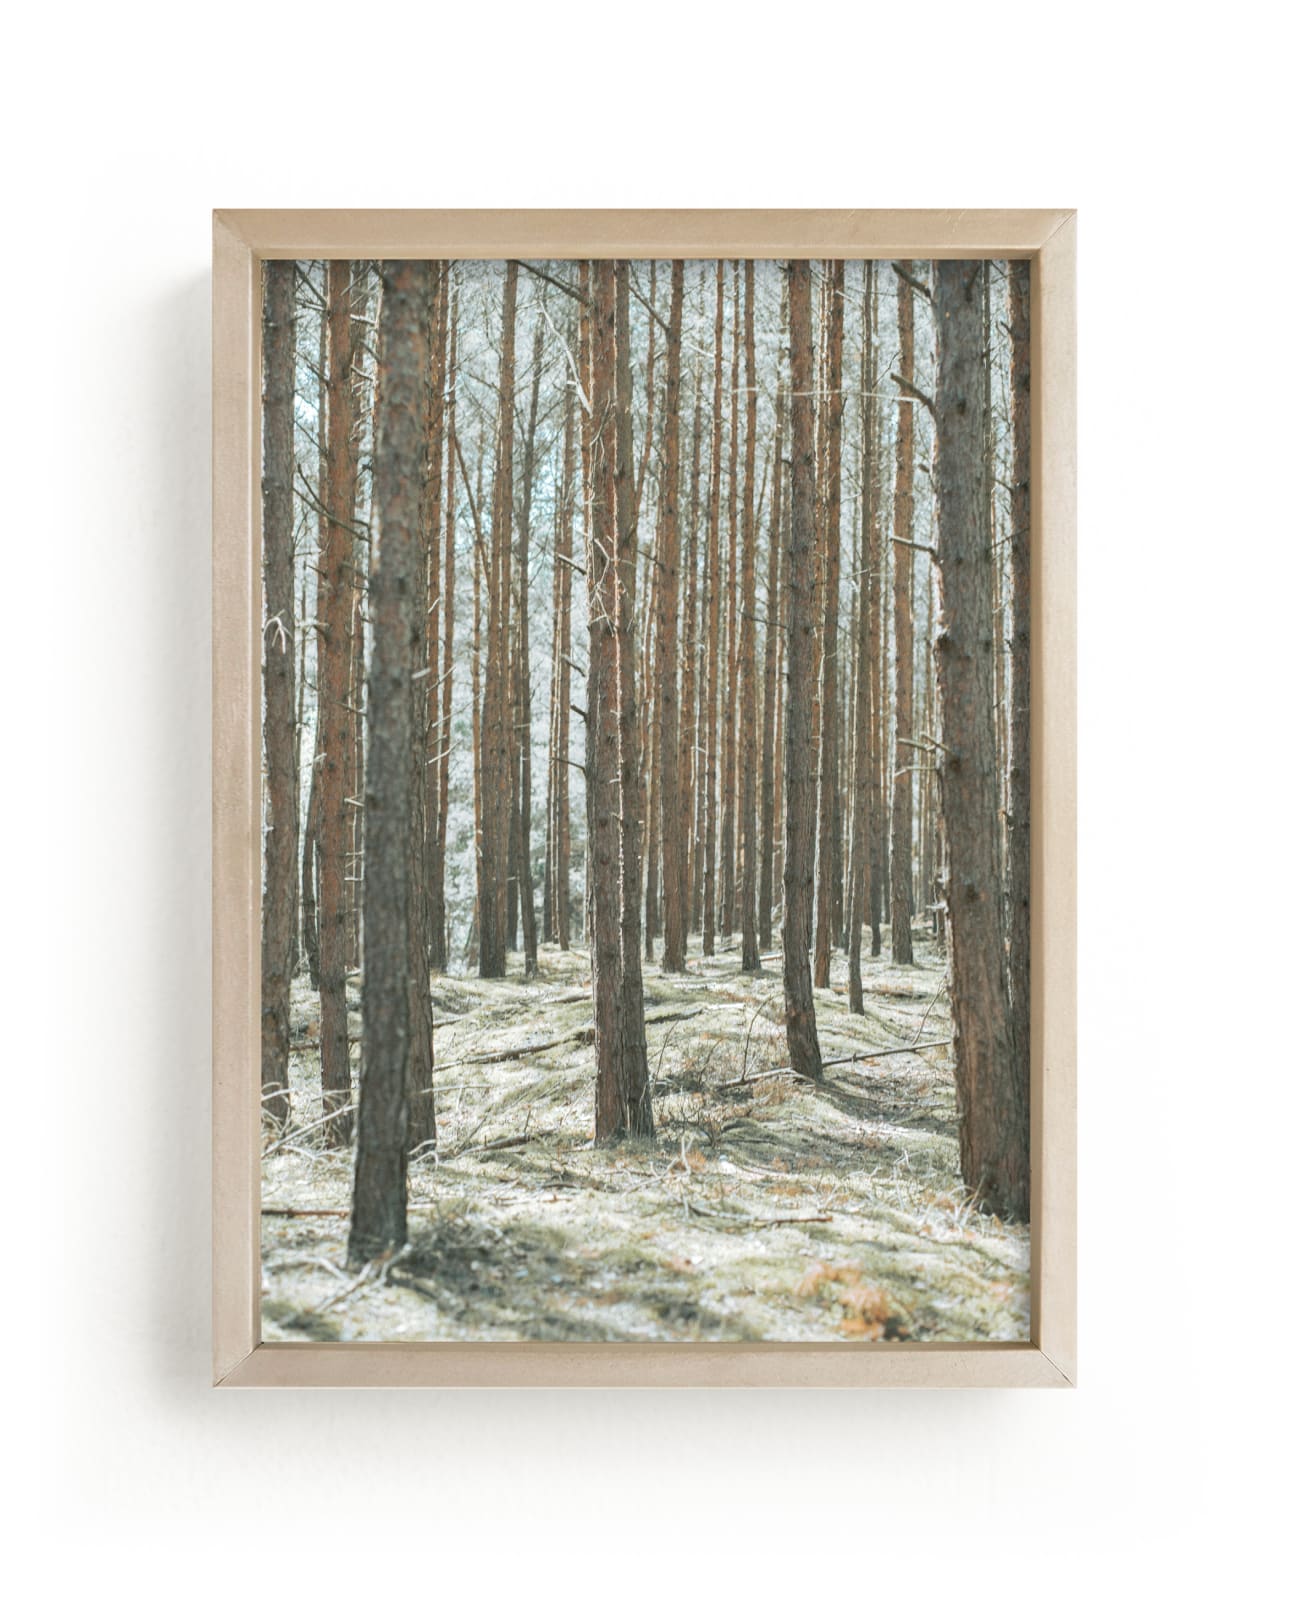 "Sharp forest" by Lying on the grass in beautiful frame options and a variety of sizes.